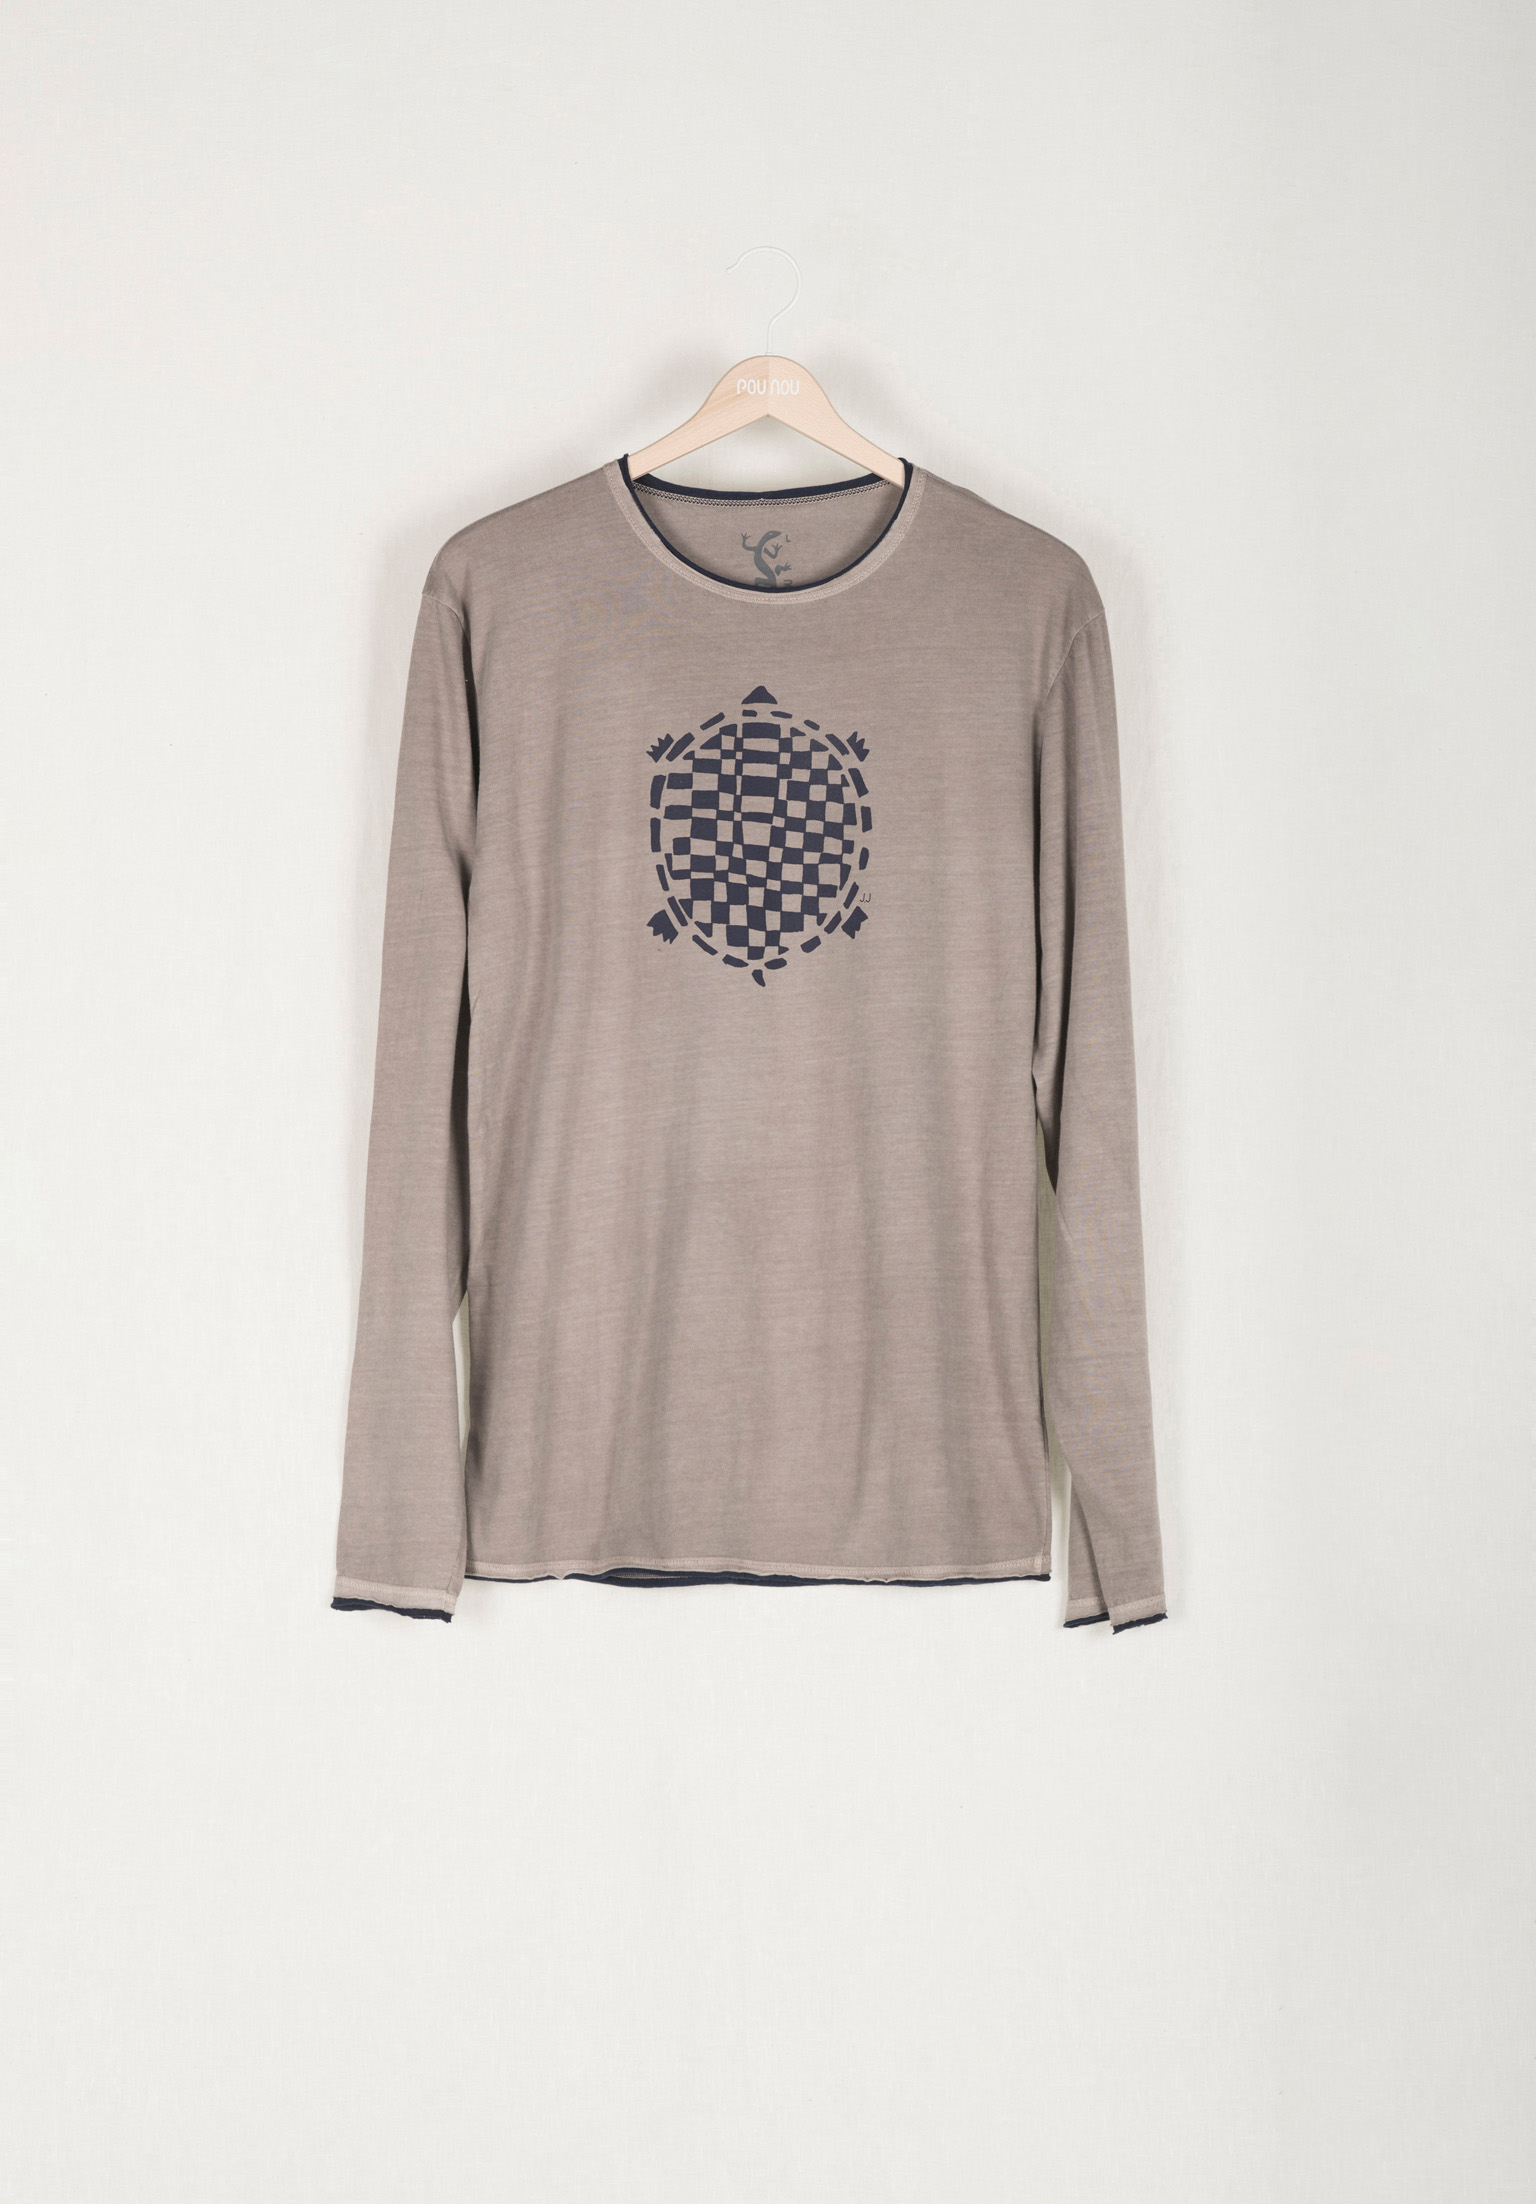 Long-sleeved cotton t-shirt rollie ethnic turtle